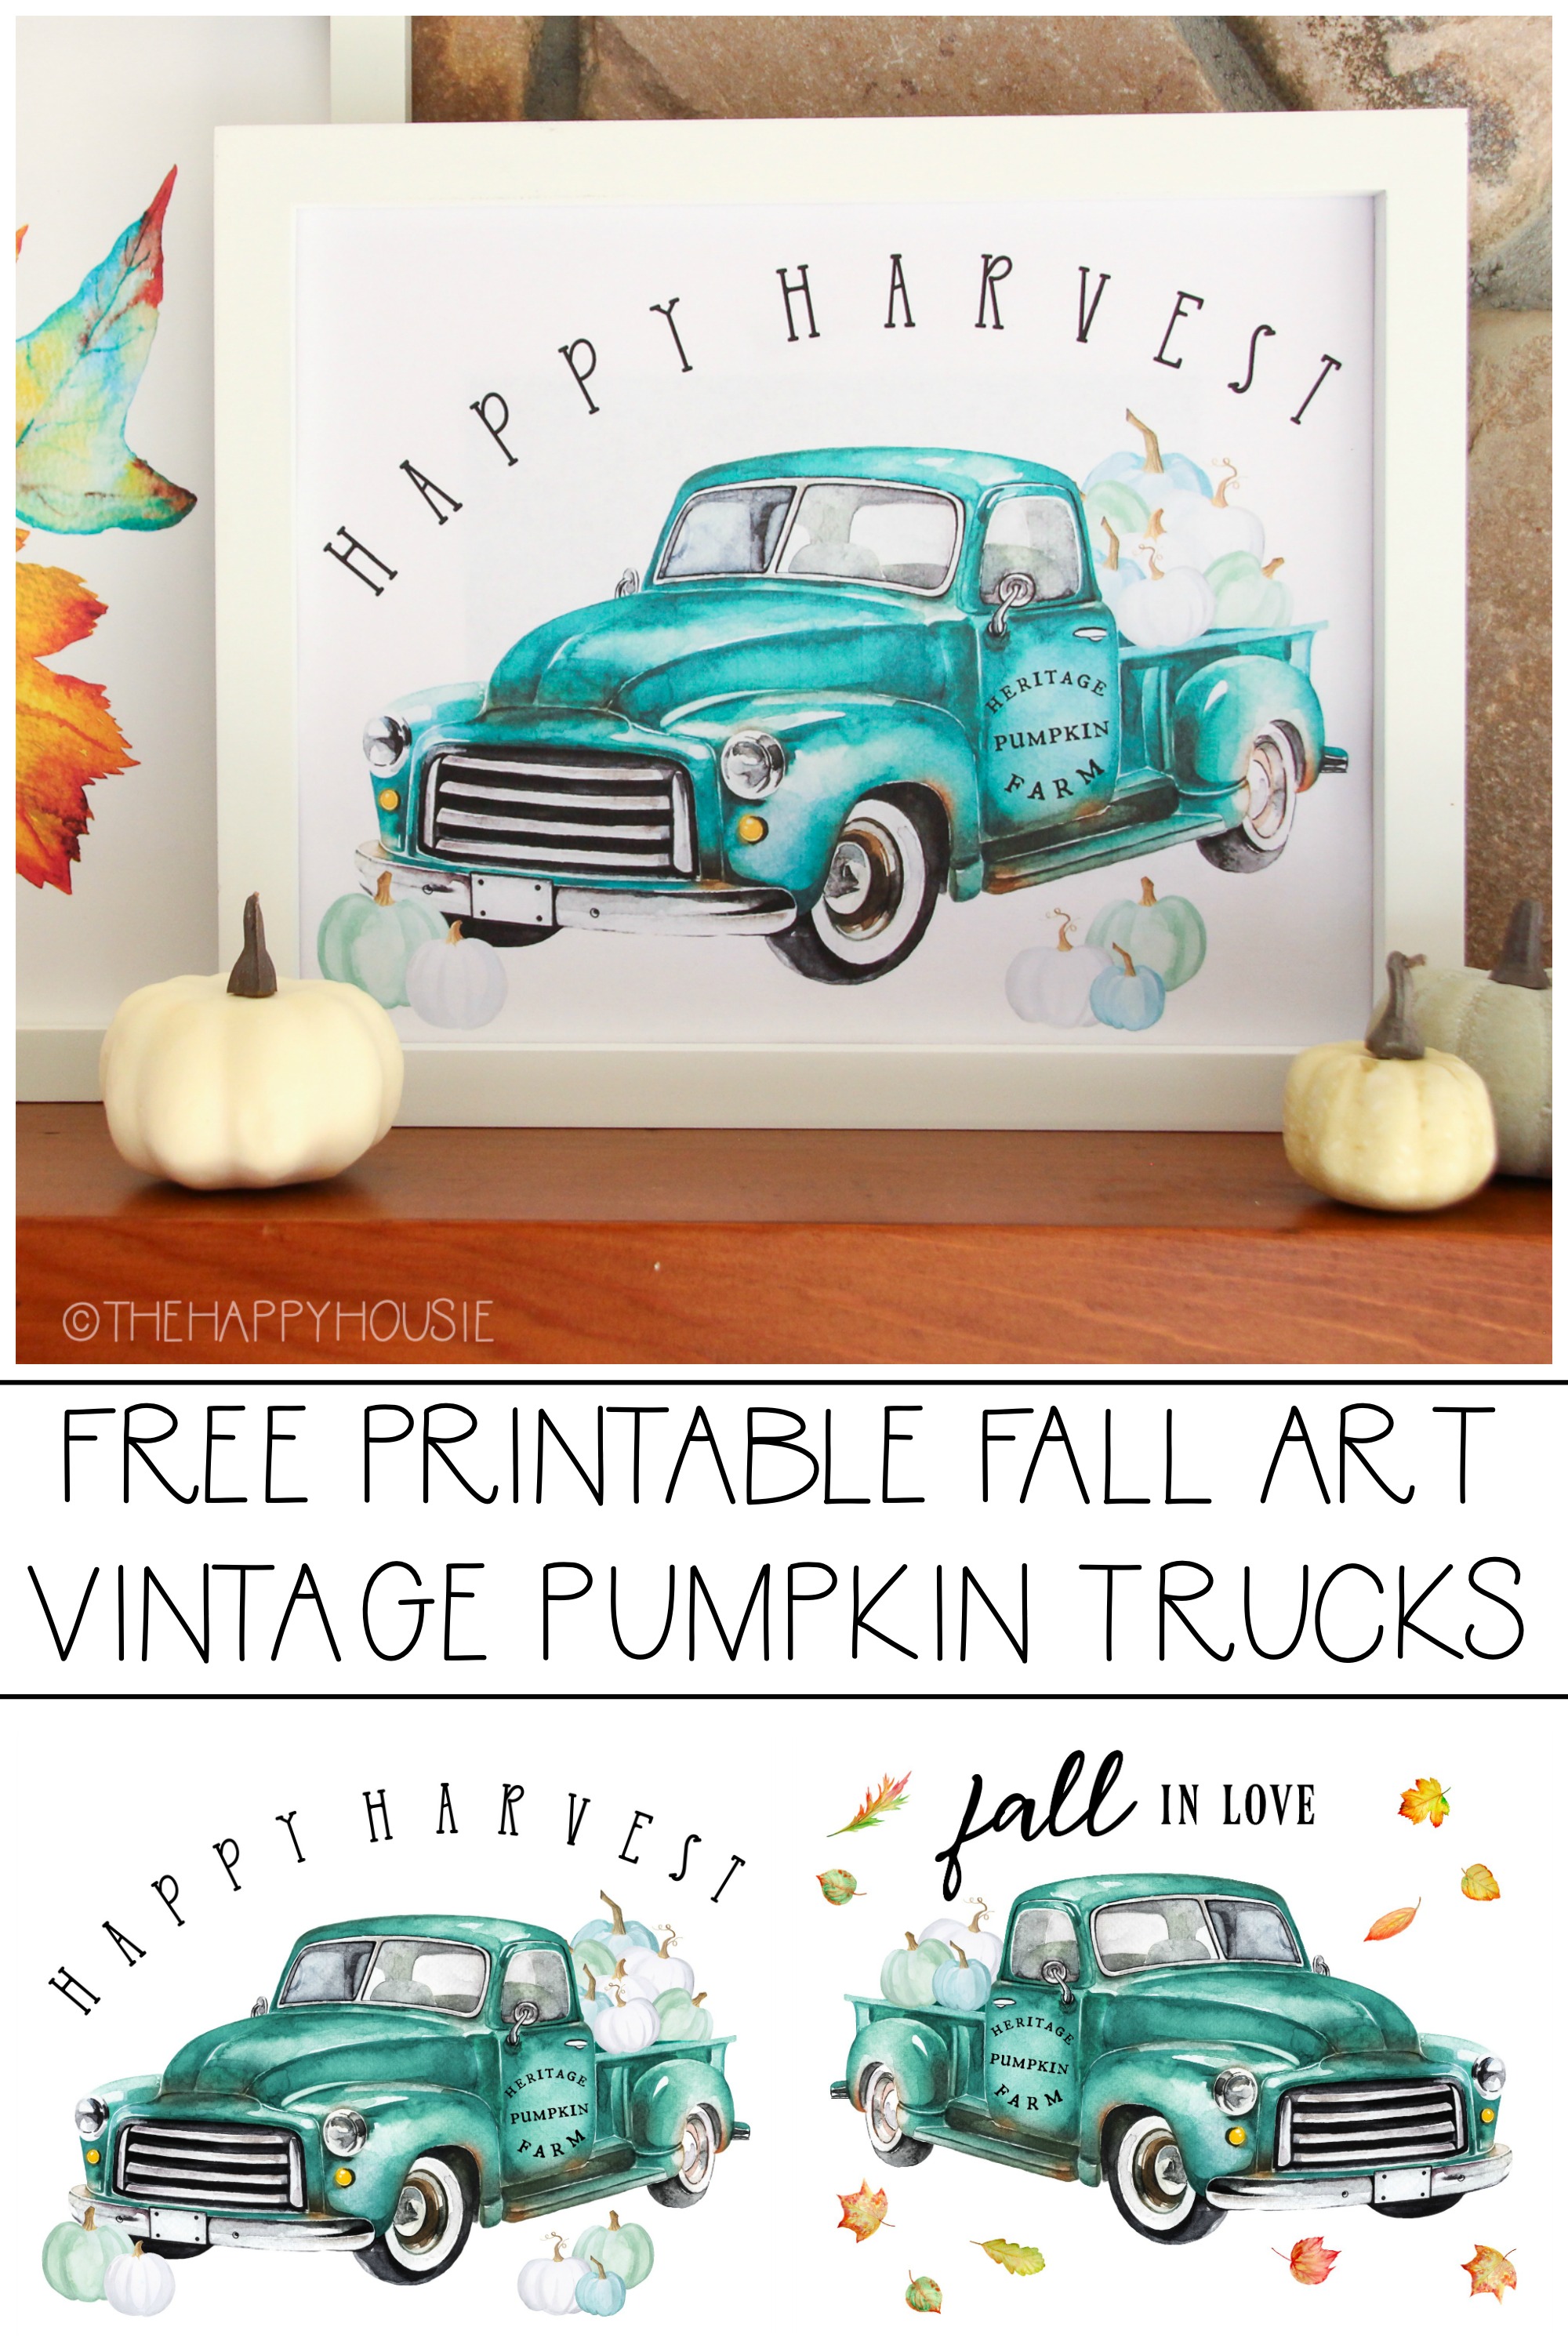 15 Pretty Free Fall Wall Art Printables- A fun and frugal way to update your home's décor for fall is with free printables! This set even includes Thanksgiving and Halloween free printables, too! | #fall #Halloween #Thanksgiving #freePrintables #ACultivatedNest